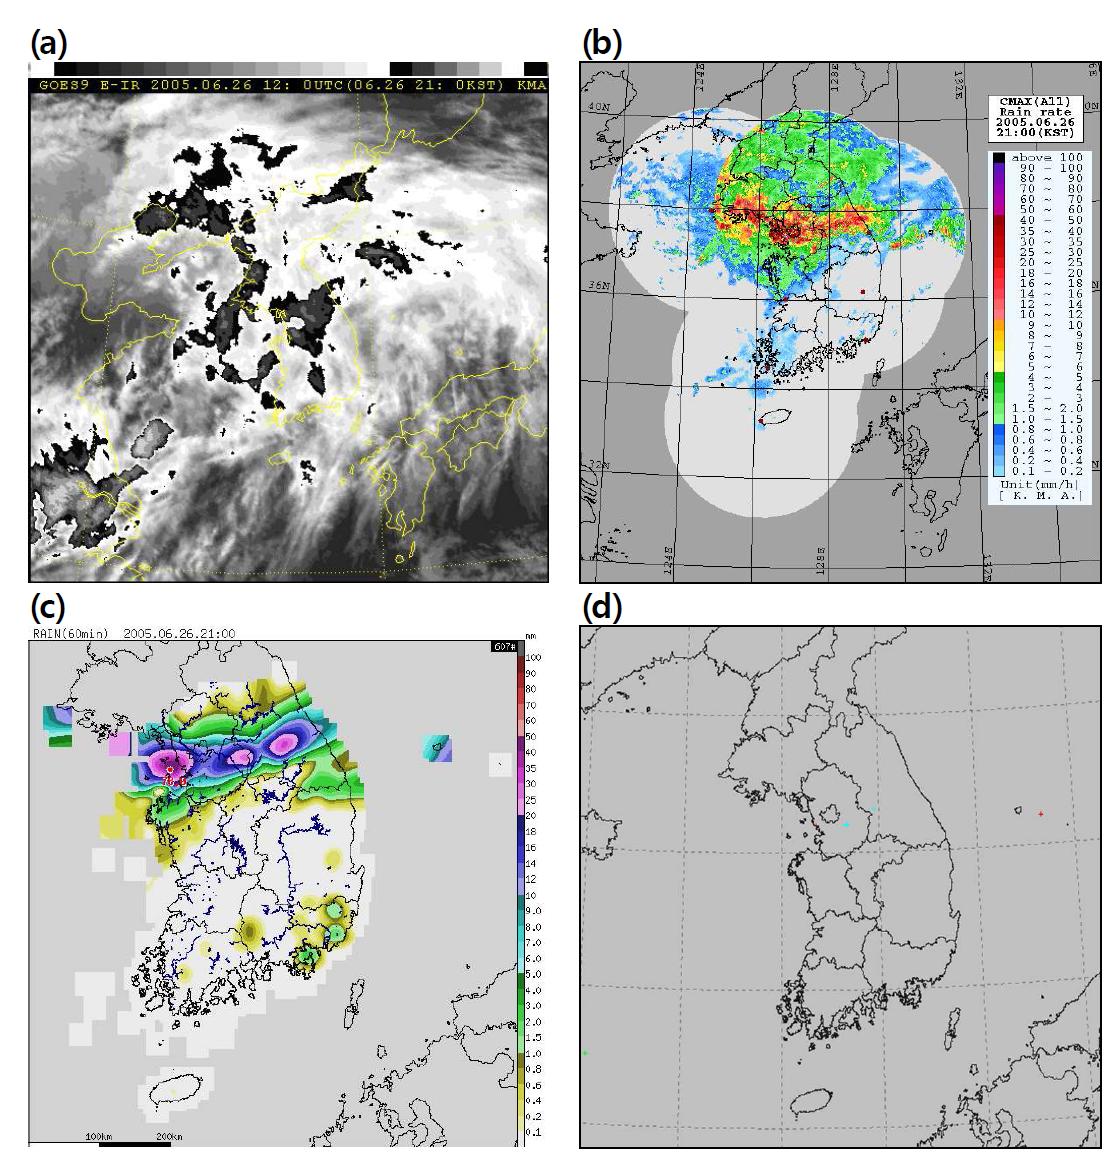 (a) Enhanced satellite images, (b) composite radar reflectivity, (c) 1-h accumulated rainfall amount, and (d) 1-h accumulated lightening frequency for 2100 KST 26 June 2005.